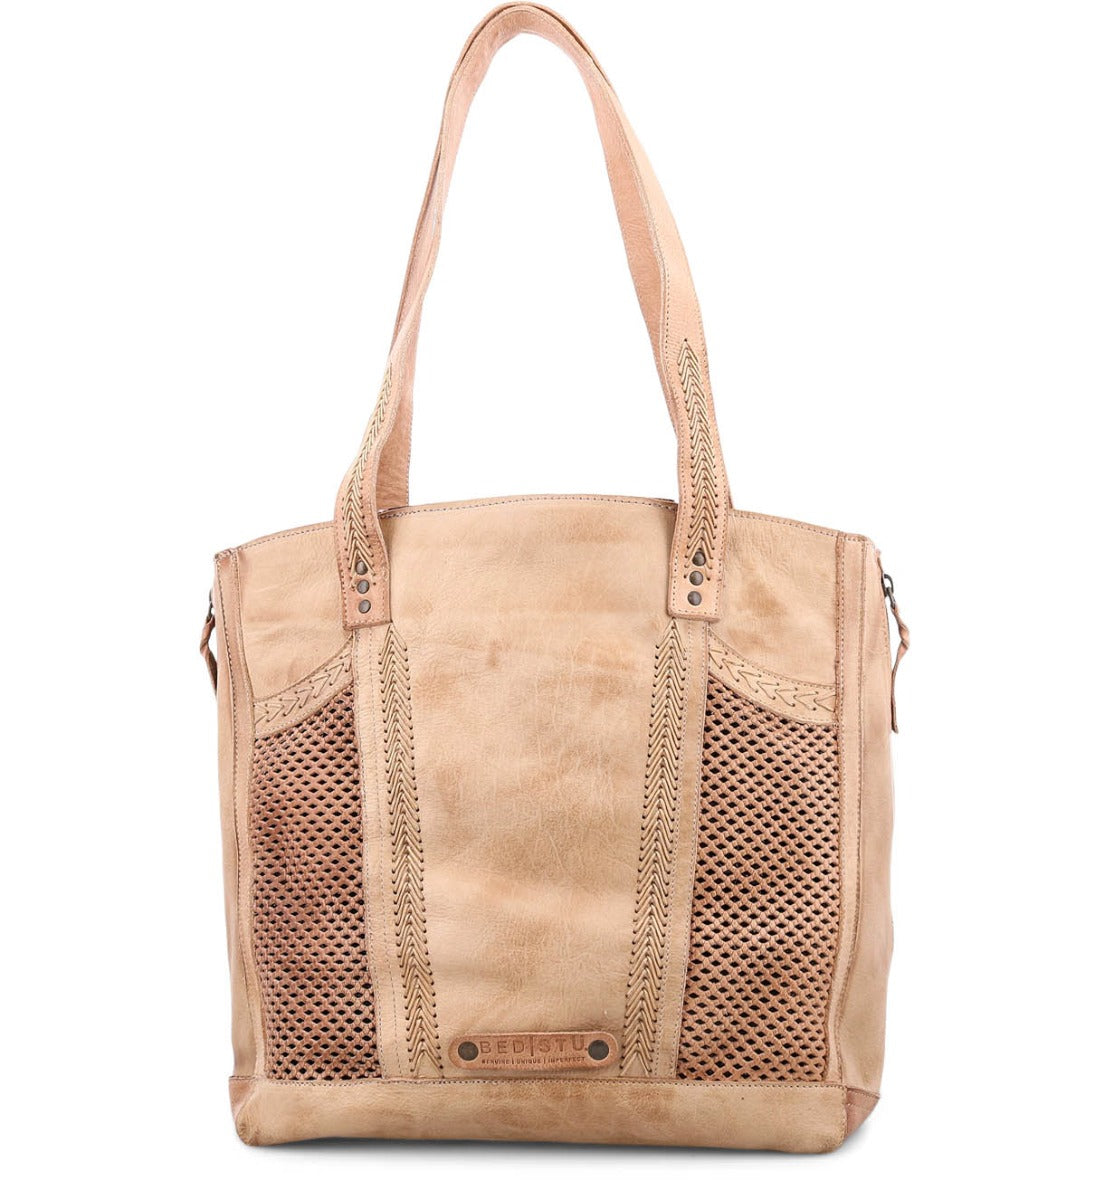 An Amelie leather tote bag by Bed Stu in tan.